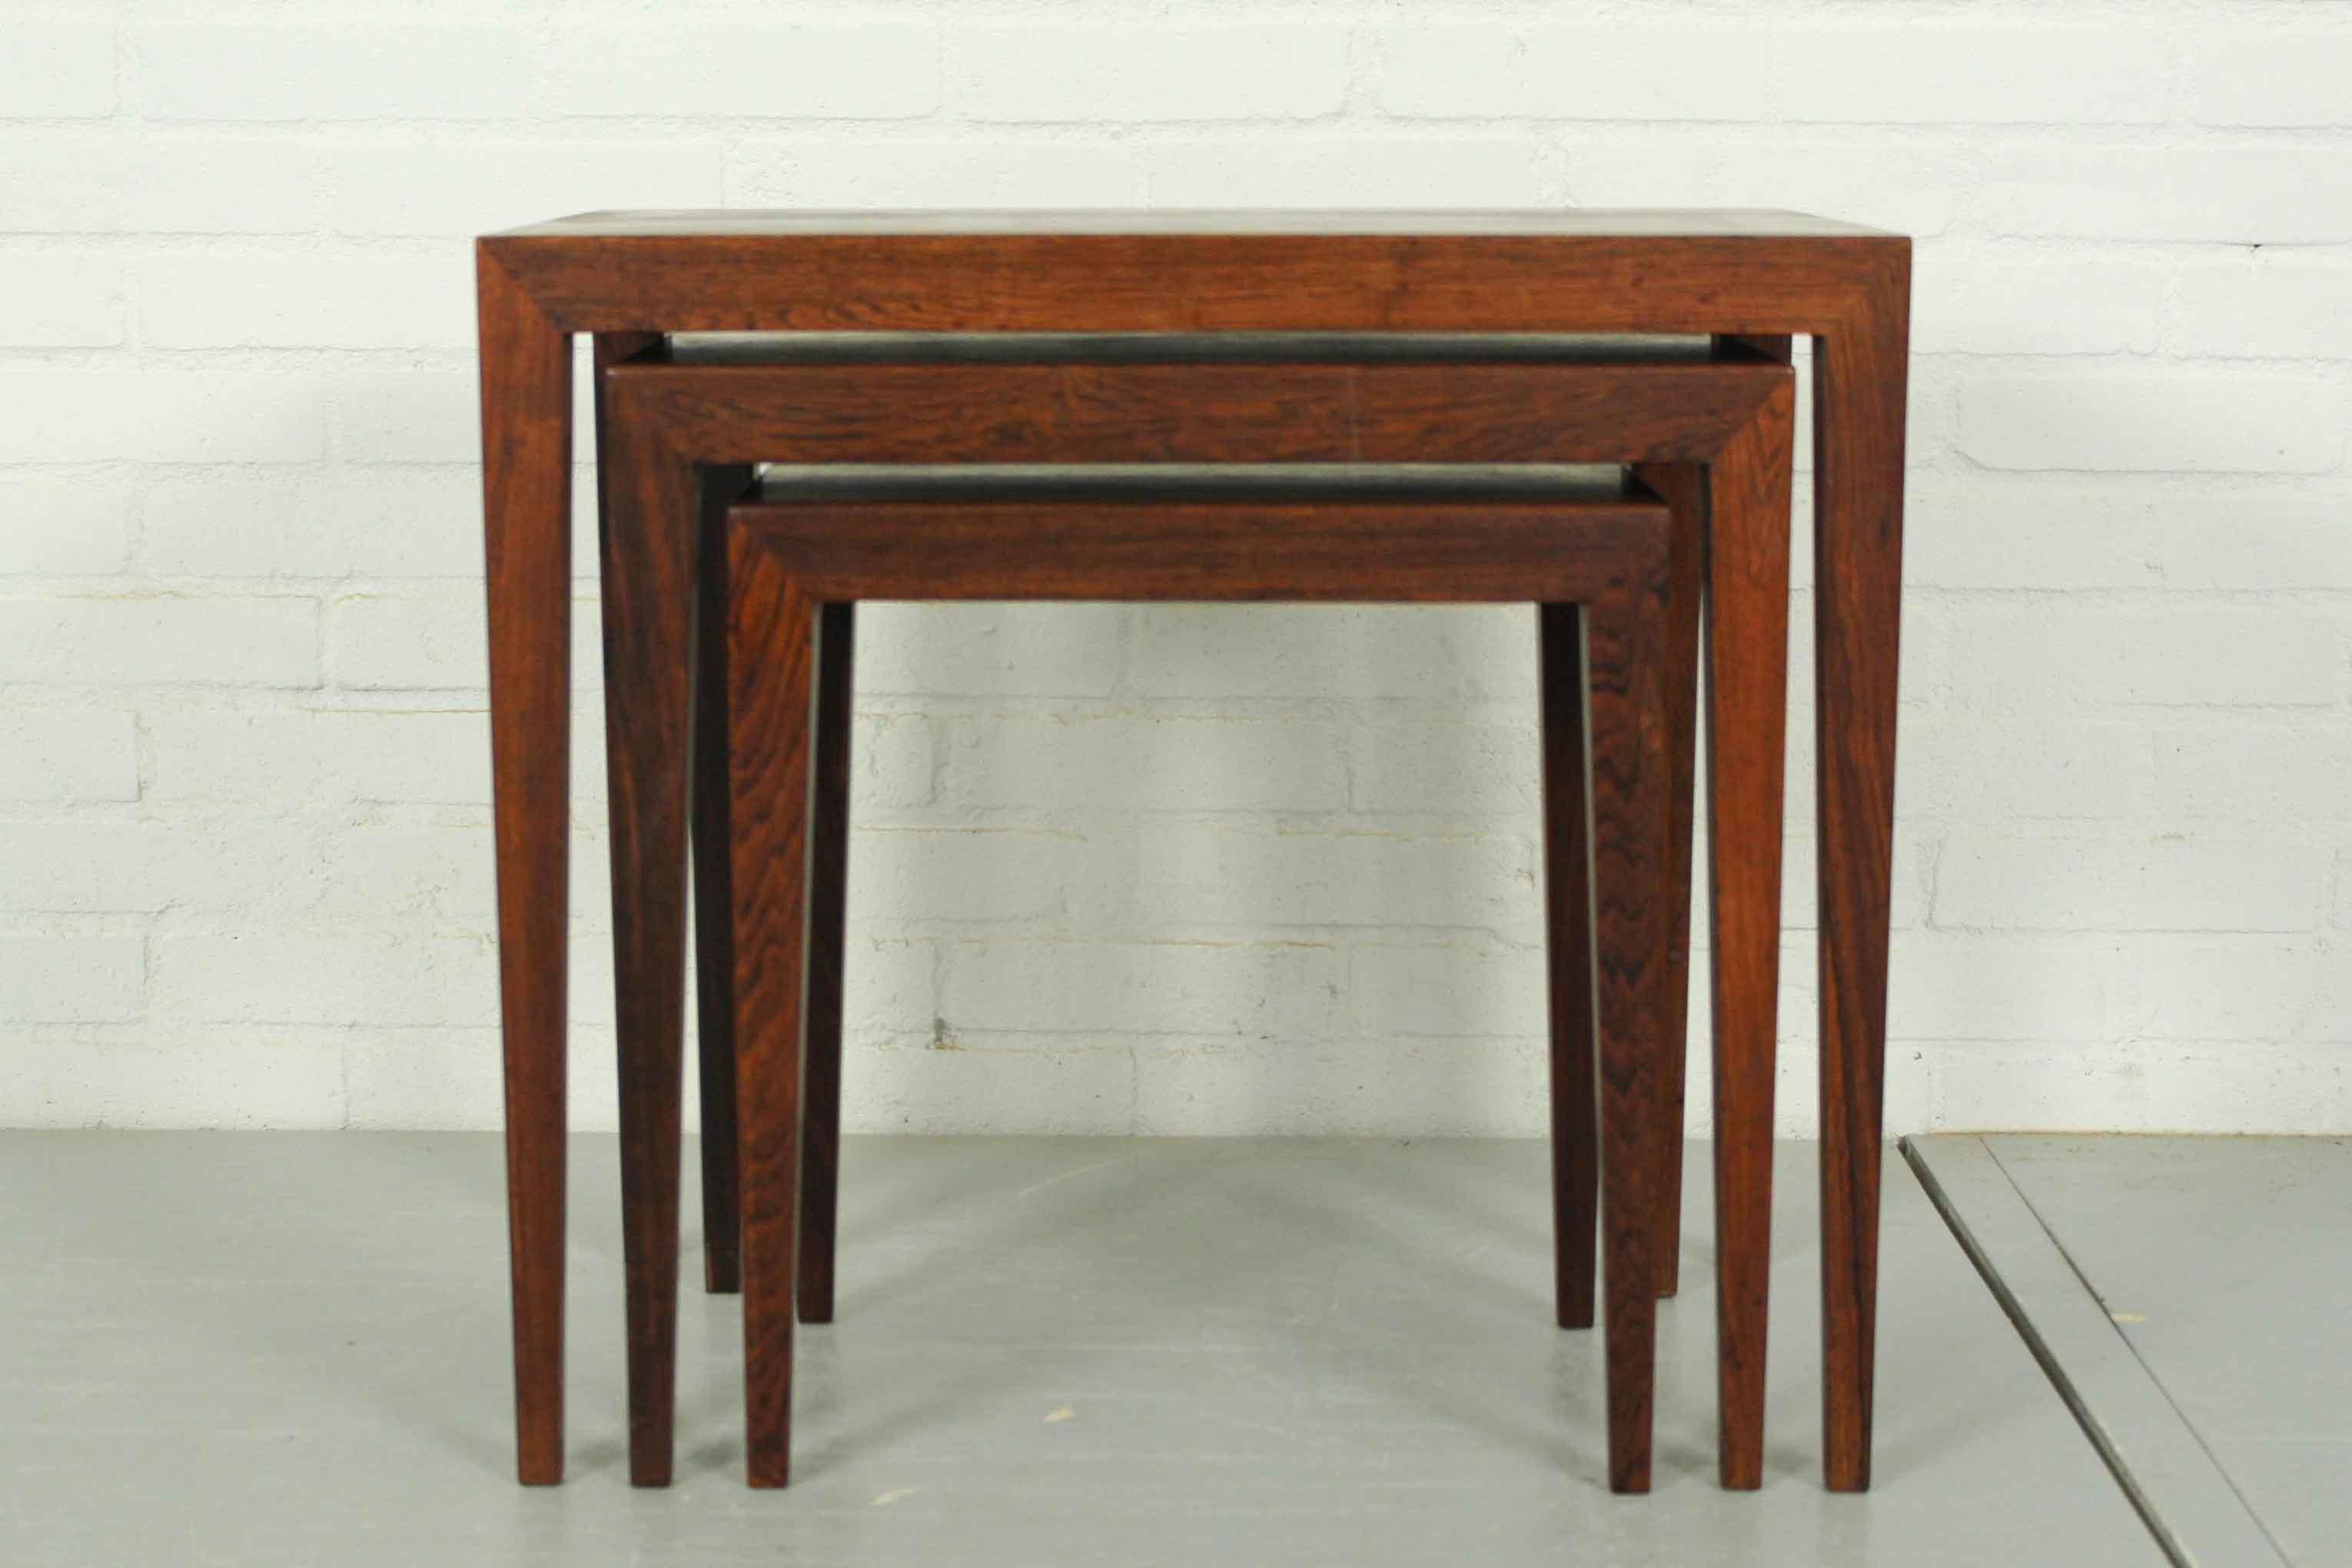 Rosewood nesting tables designed by Severin Hansen for Bovenkamp, Denmark 1950s. Marked and labelled underneath. In good condition, middel table has some sign of use as depicted on photographs. 

Dimensions small table: 41cm H, 38cm L, 27cm W.